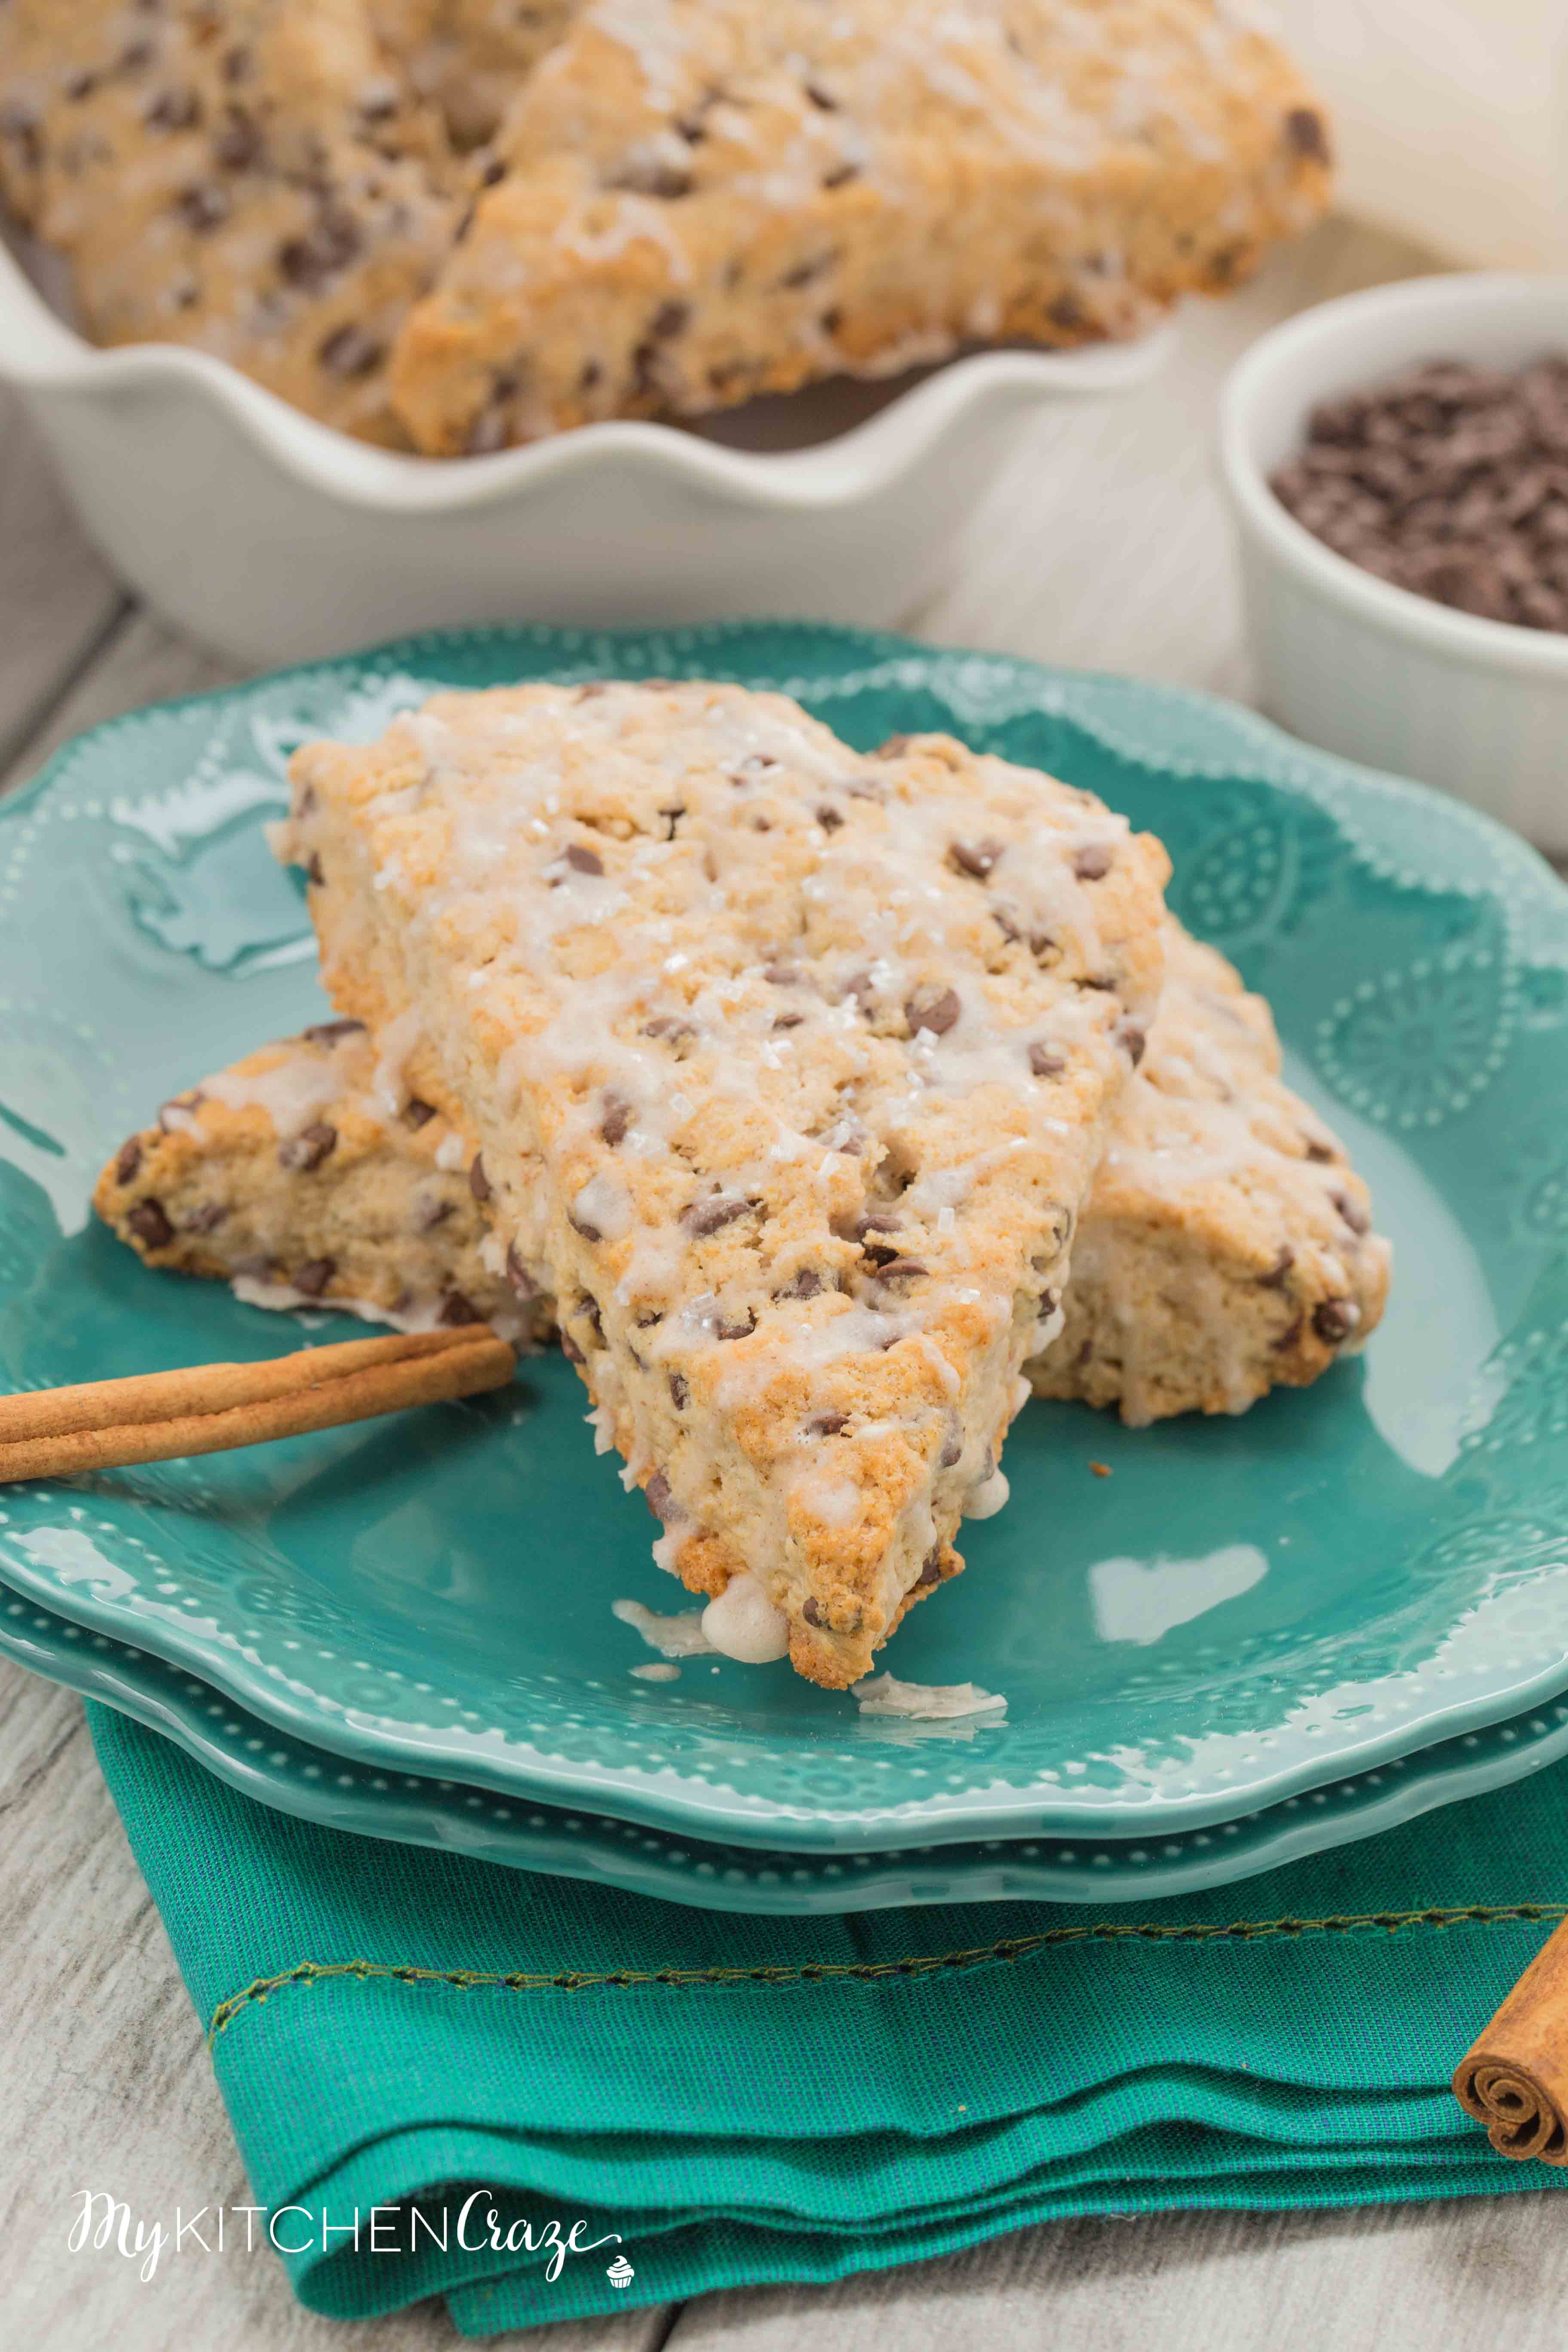 Cinnamon Chocolate Chip Scones ~ mykitchencraze.com ~ These scones are packed with chocolate chips and topped with a cinnamon glaze. These are the most delicious scones e-v-e-r! Moist, crumbly and irresistible. Give them a try.